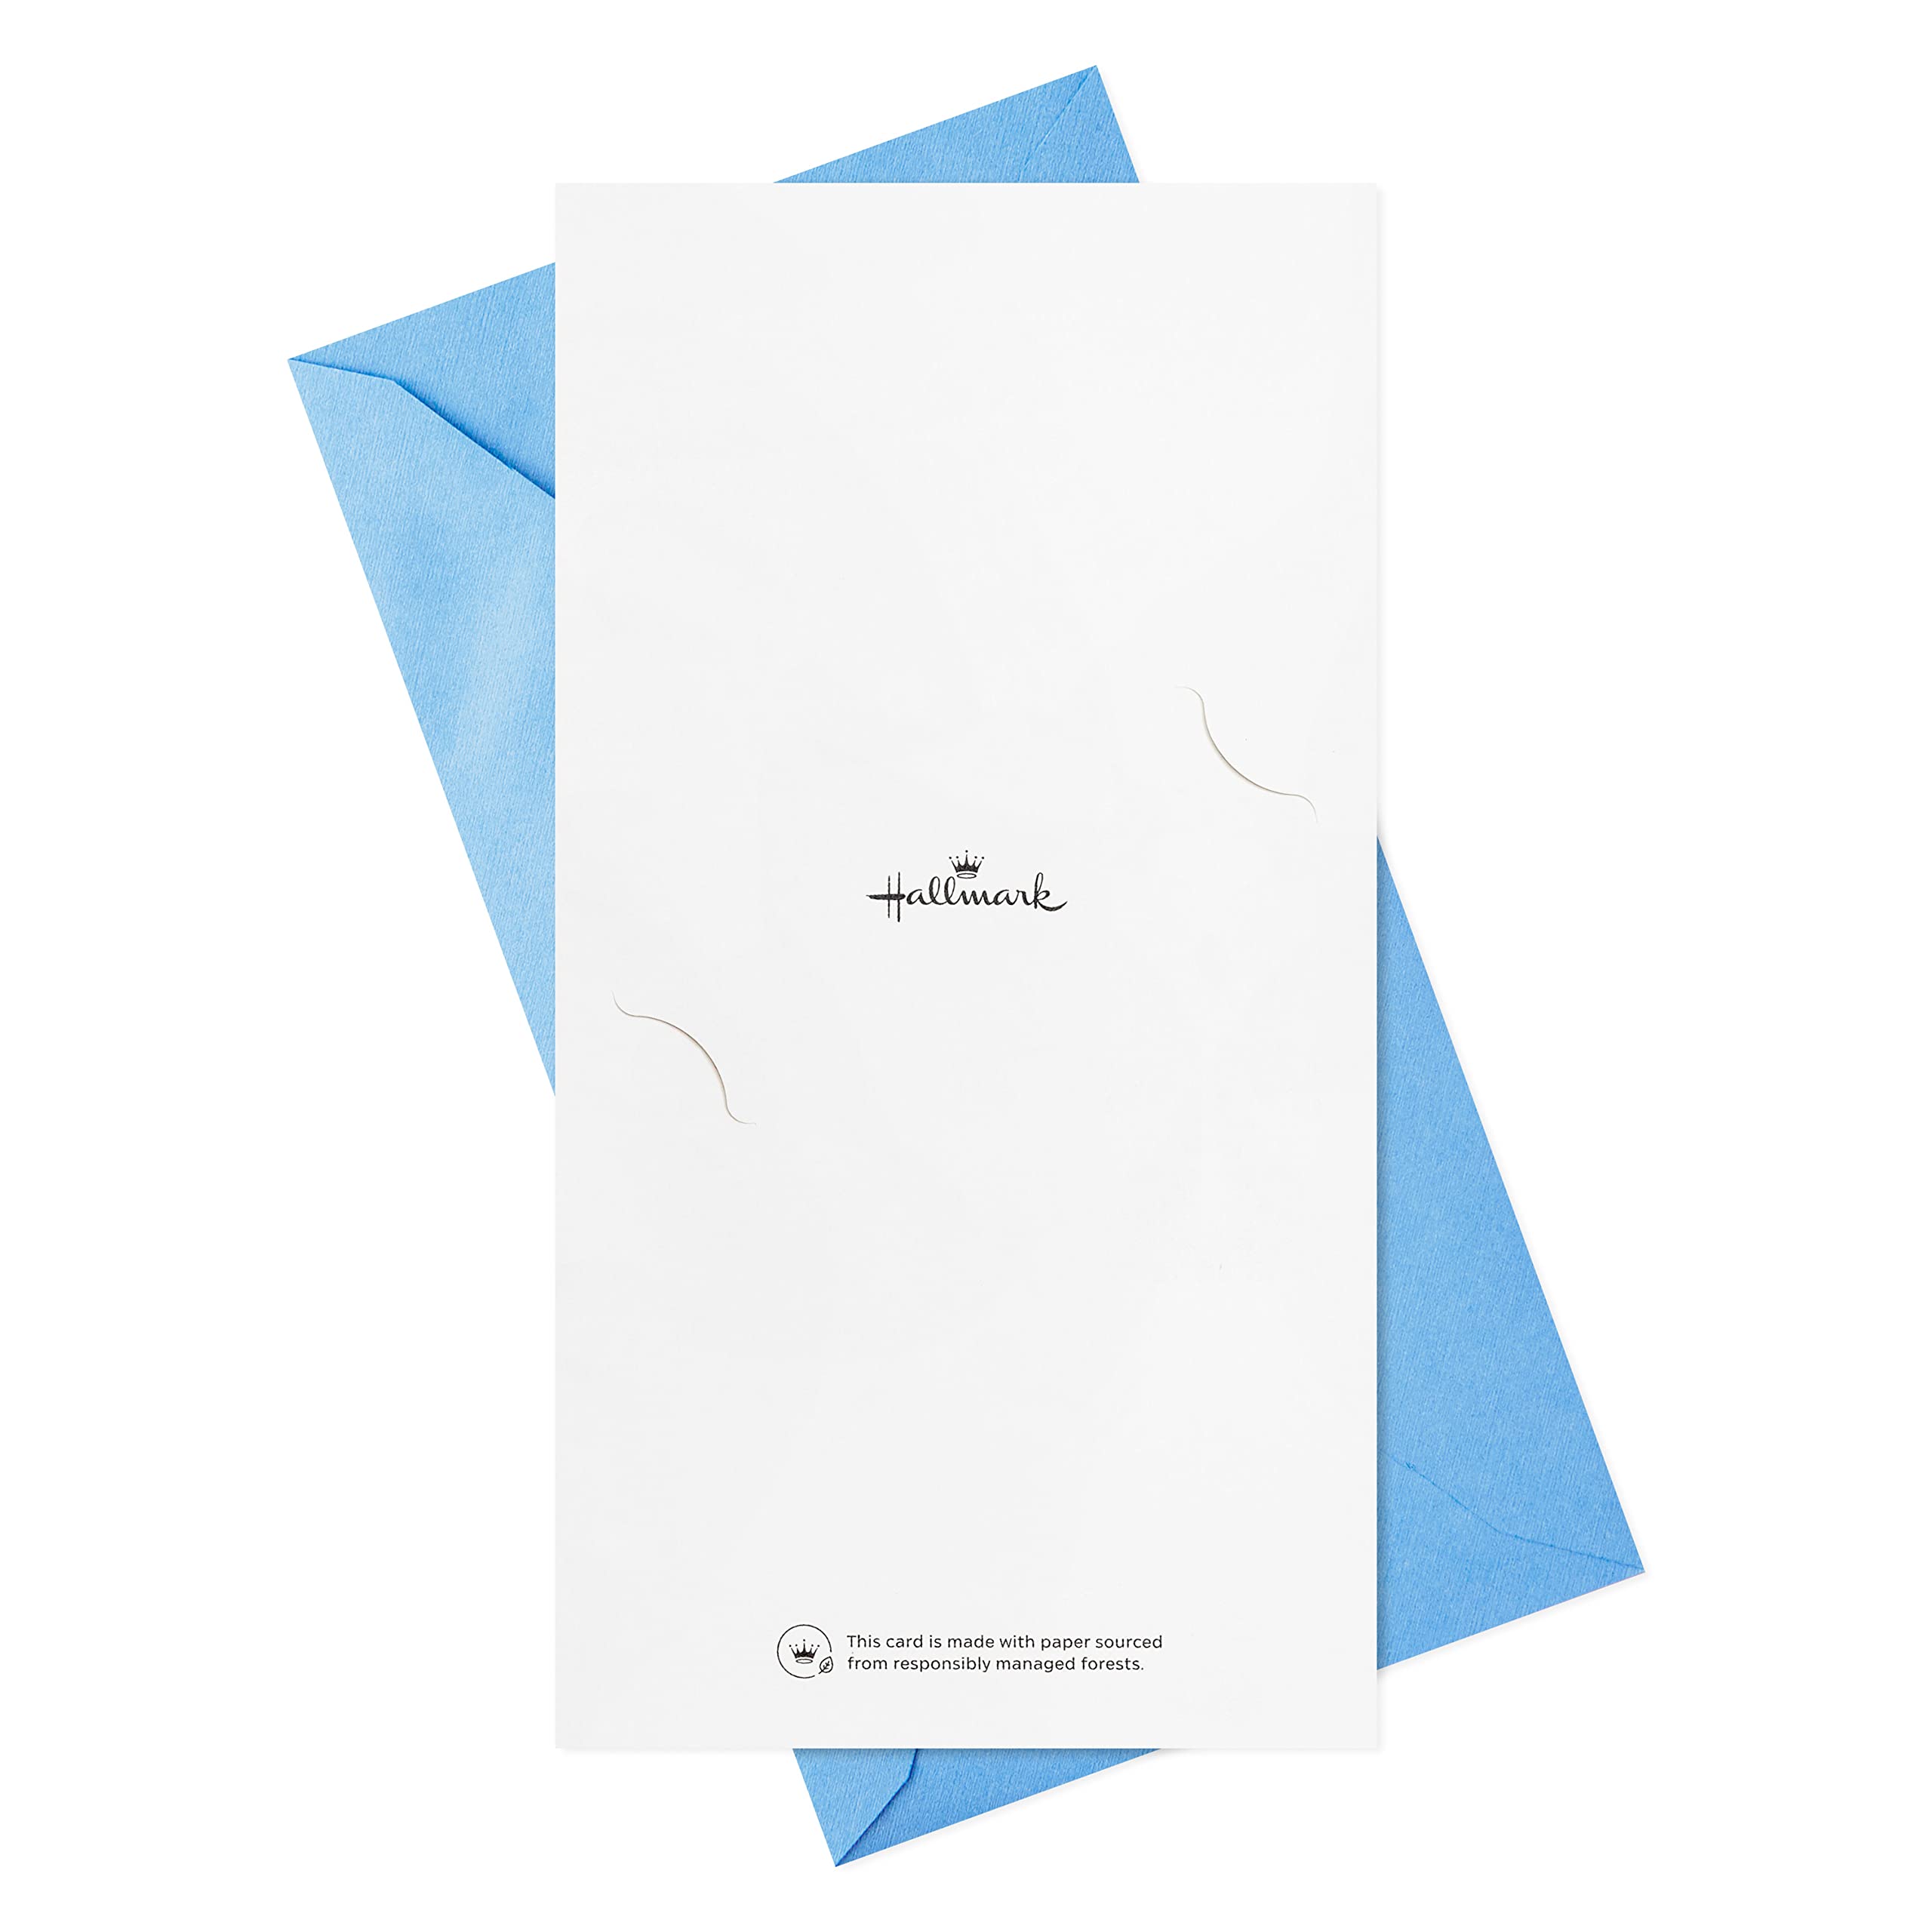 Hallmark Graduation Money Holders or Gift Card Holders Assortment with Envelopes, You Did It (36 Cards and Envelopes)